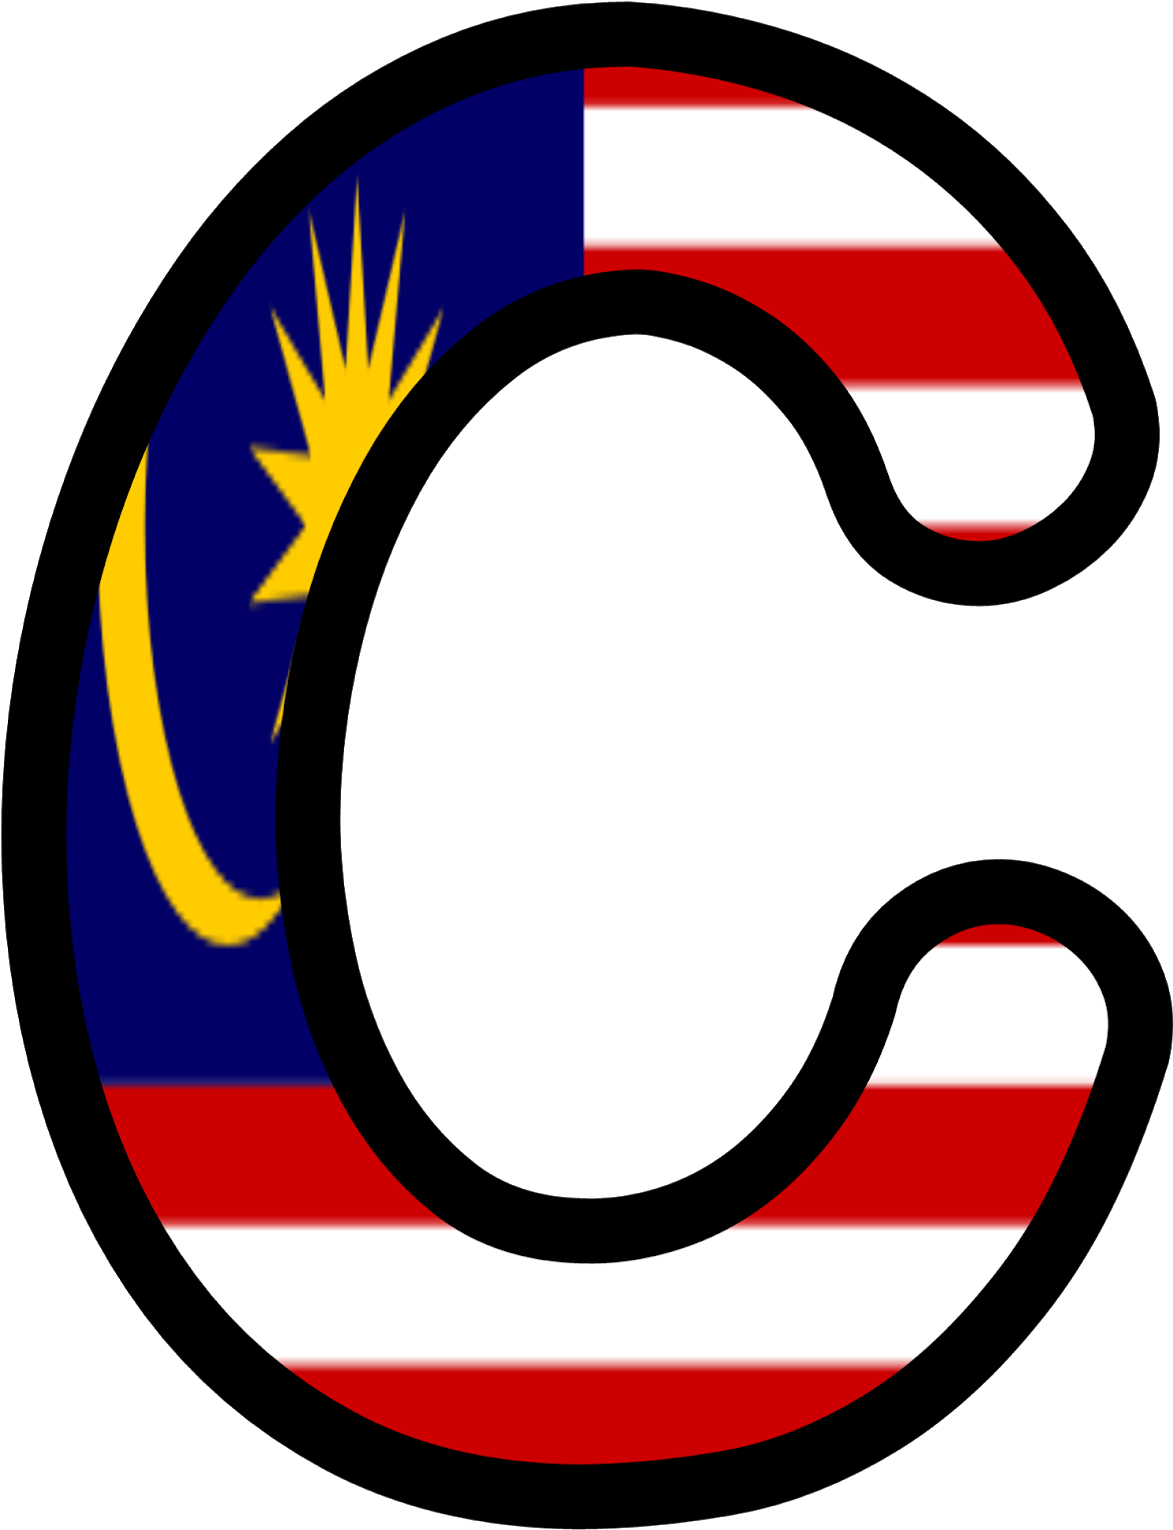 A Letter C With A Flag